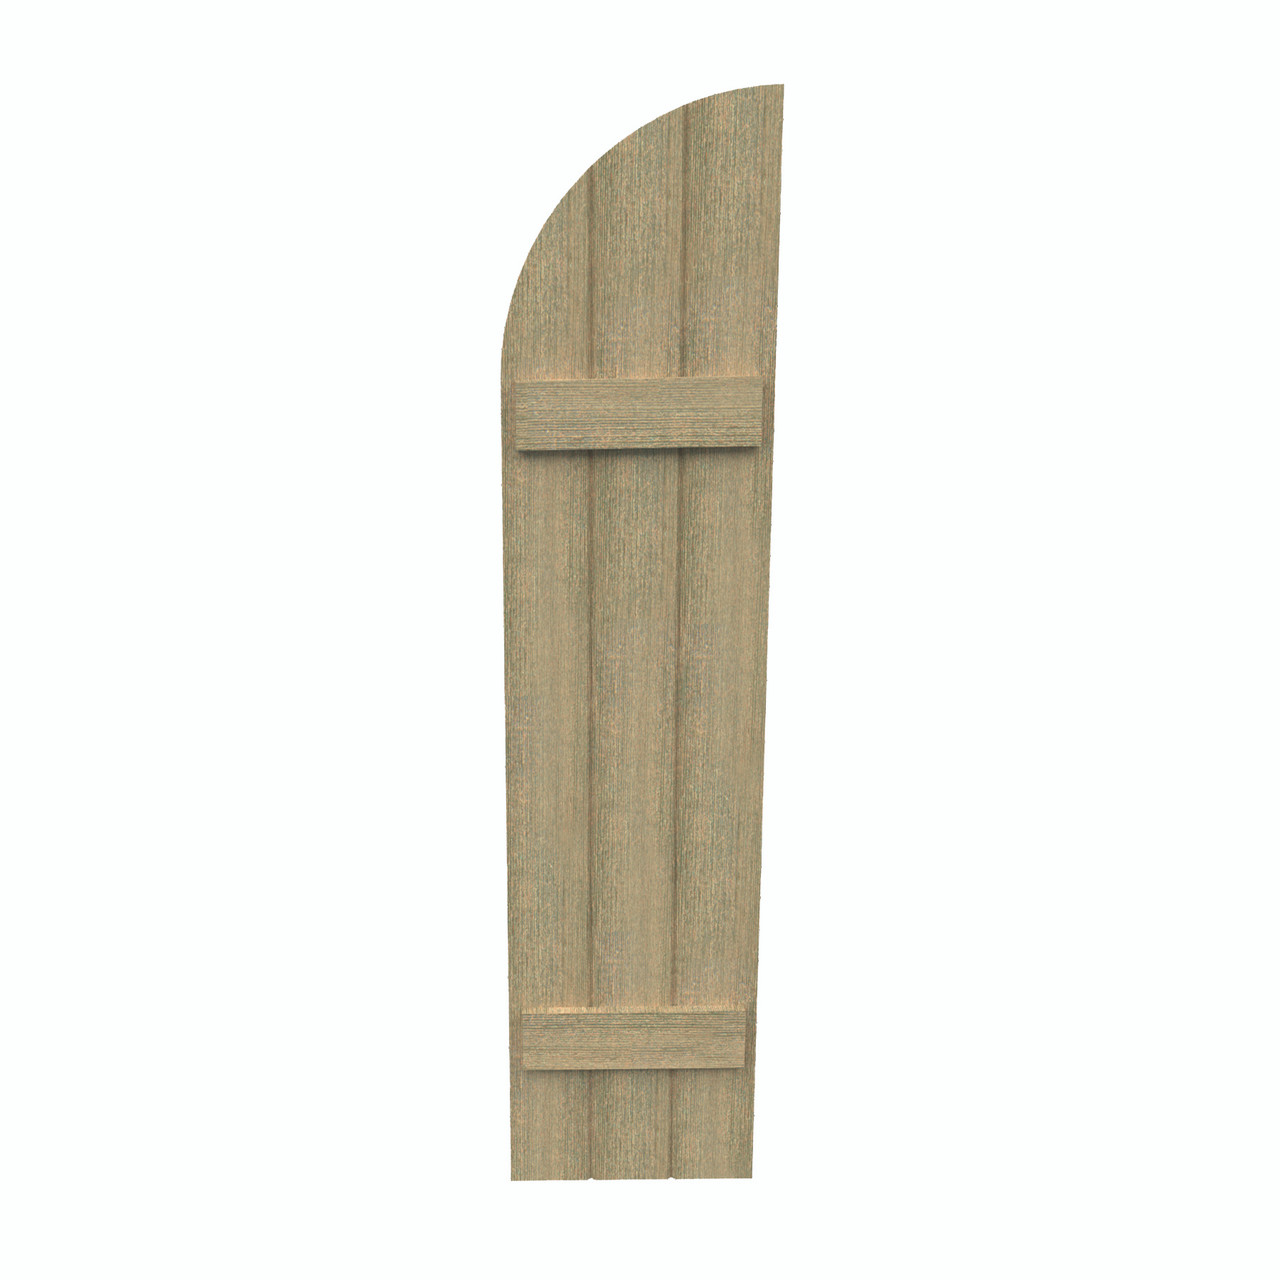 18 inch by 109 inch Quarter Round Shutter with 3-Boards